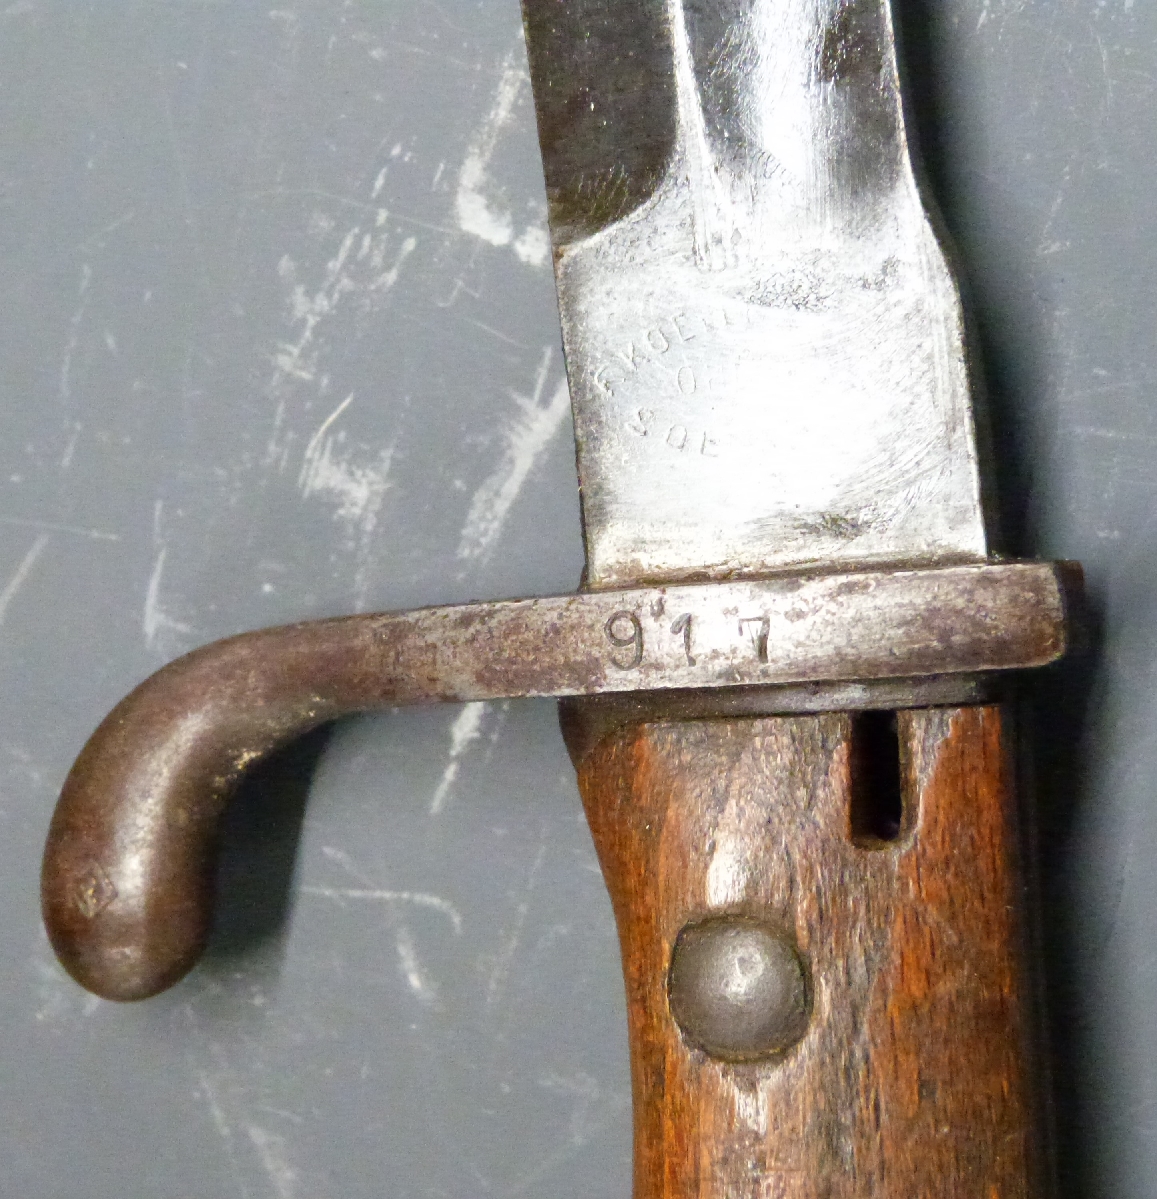 German 98/05 pattern bayonet with sawback removed, marked 917 to crossguard, 36cm blade, with - Image 6 of 6